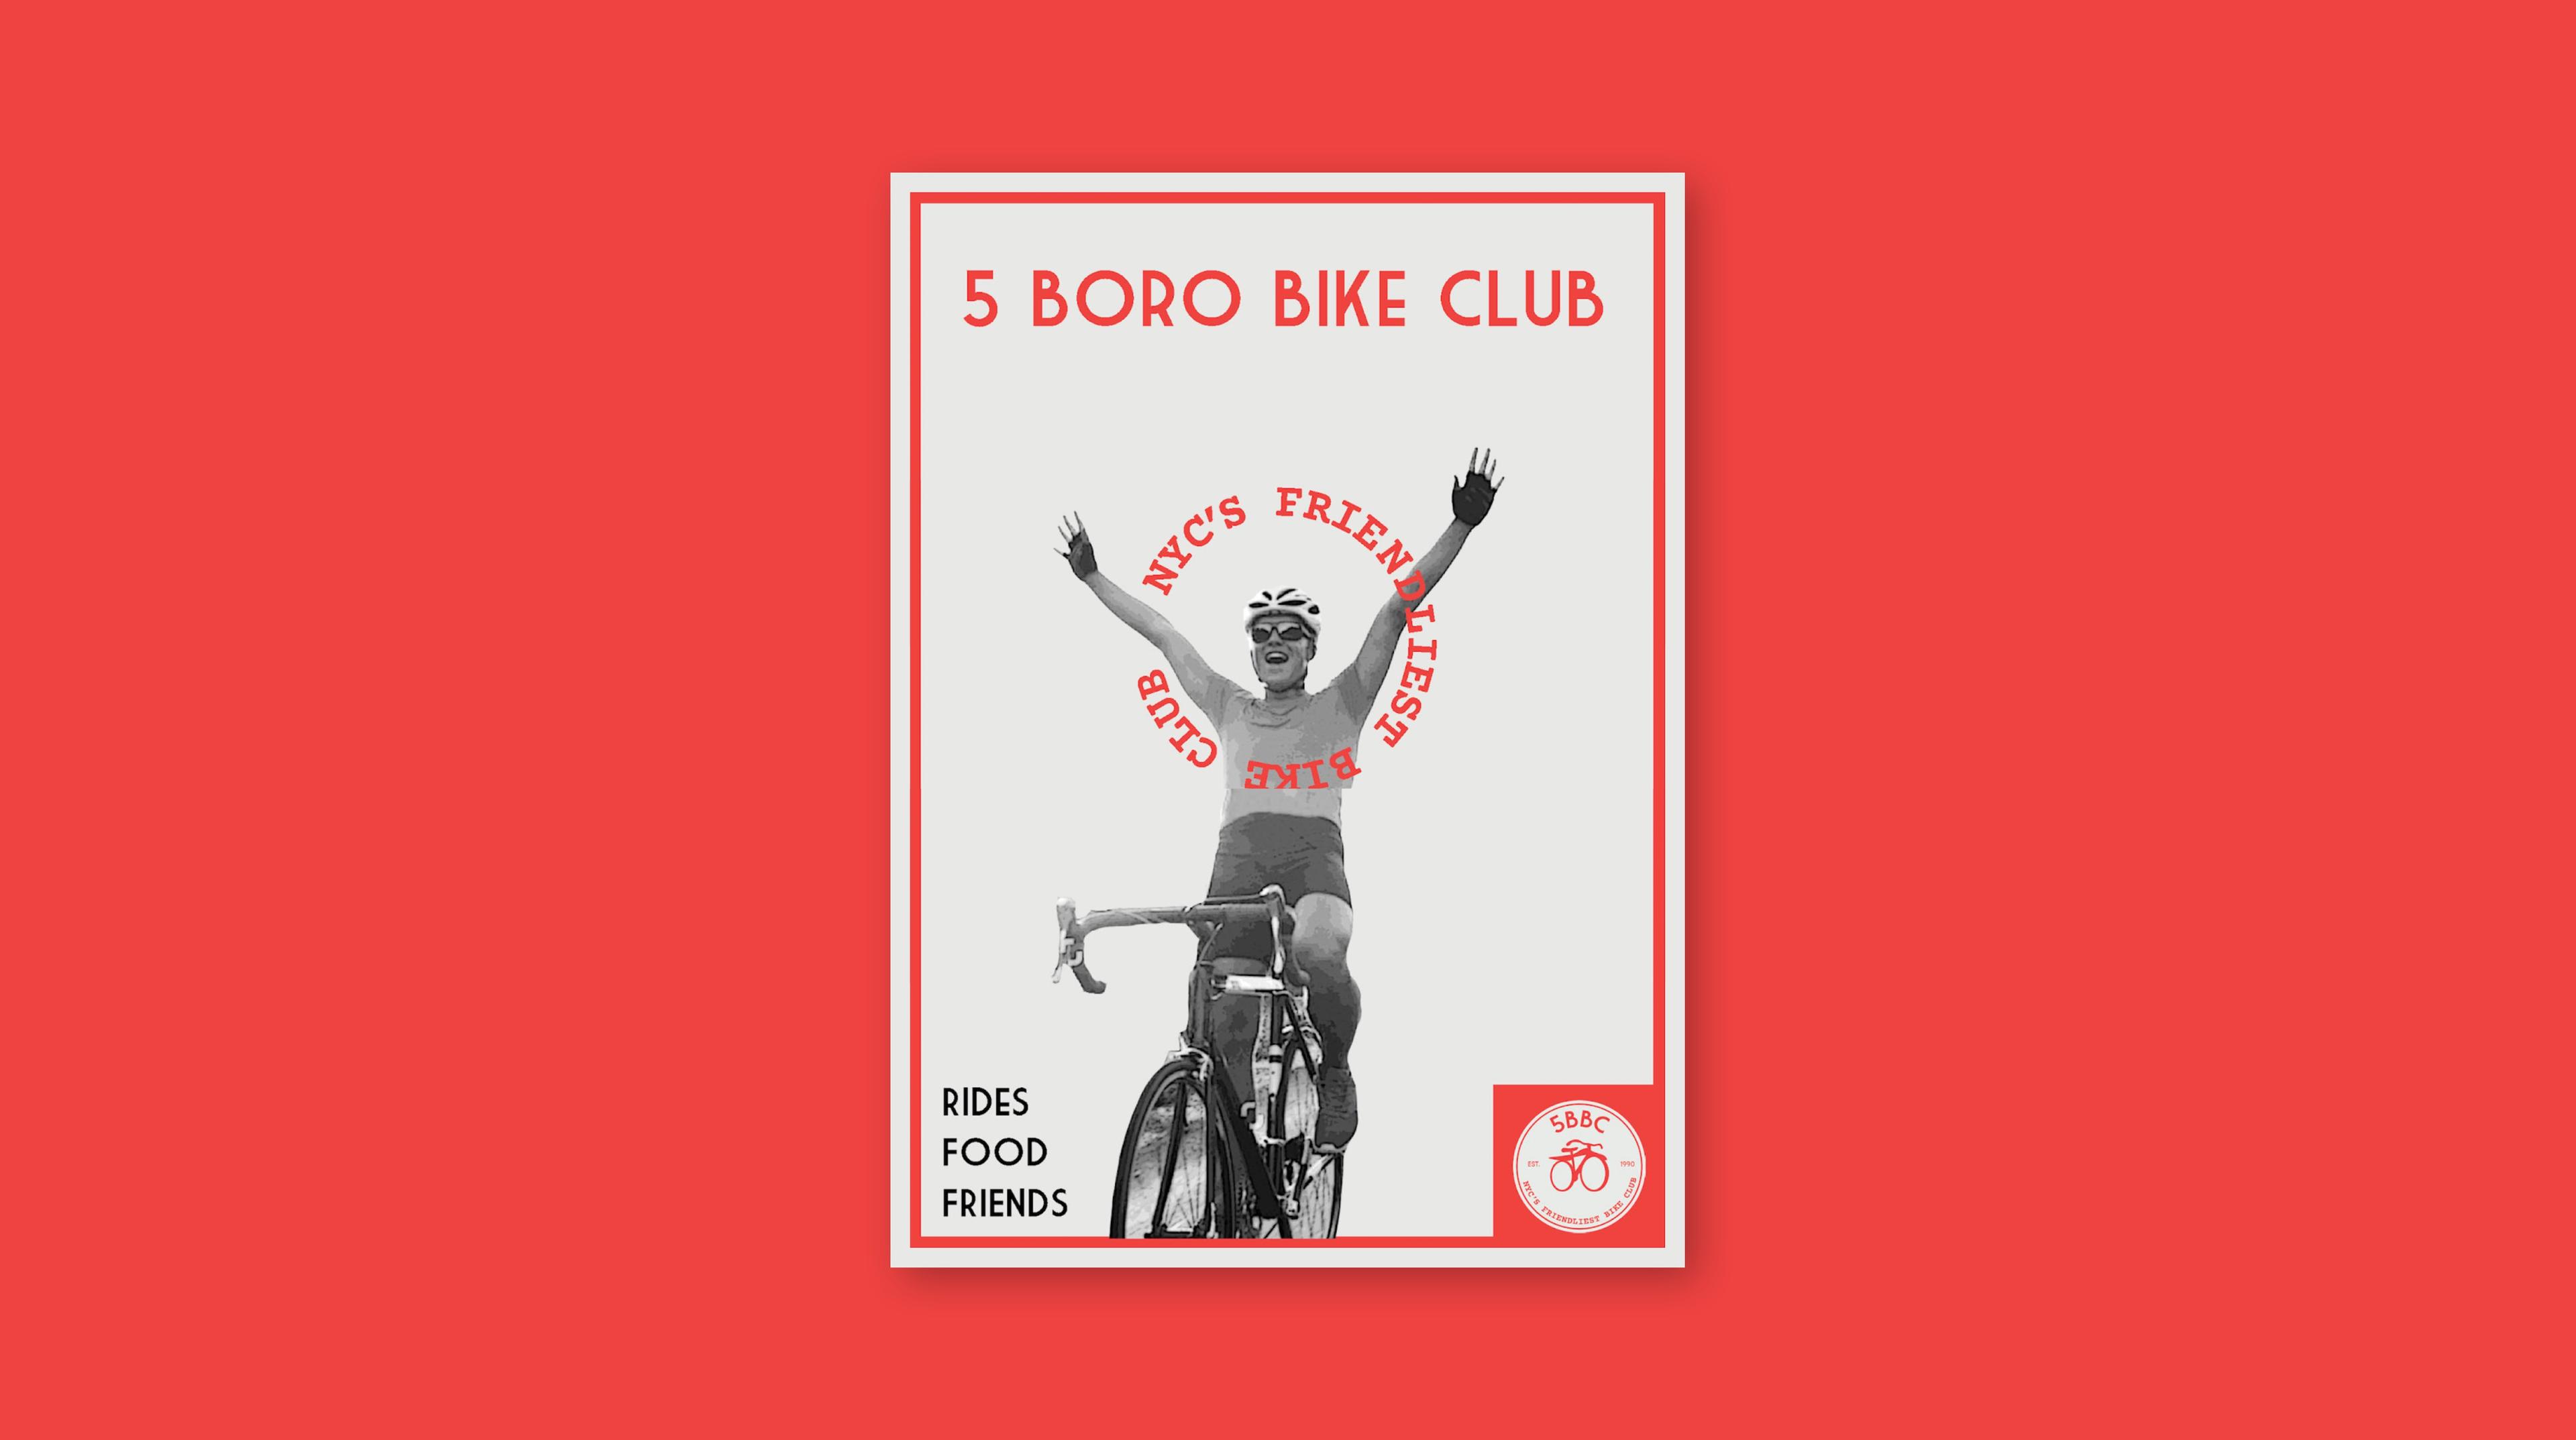 5BBC poster with a man on a bicycle